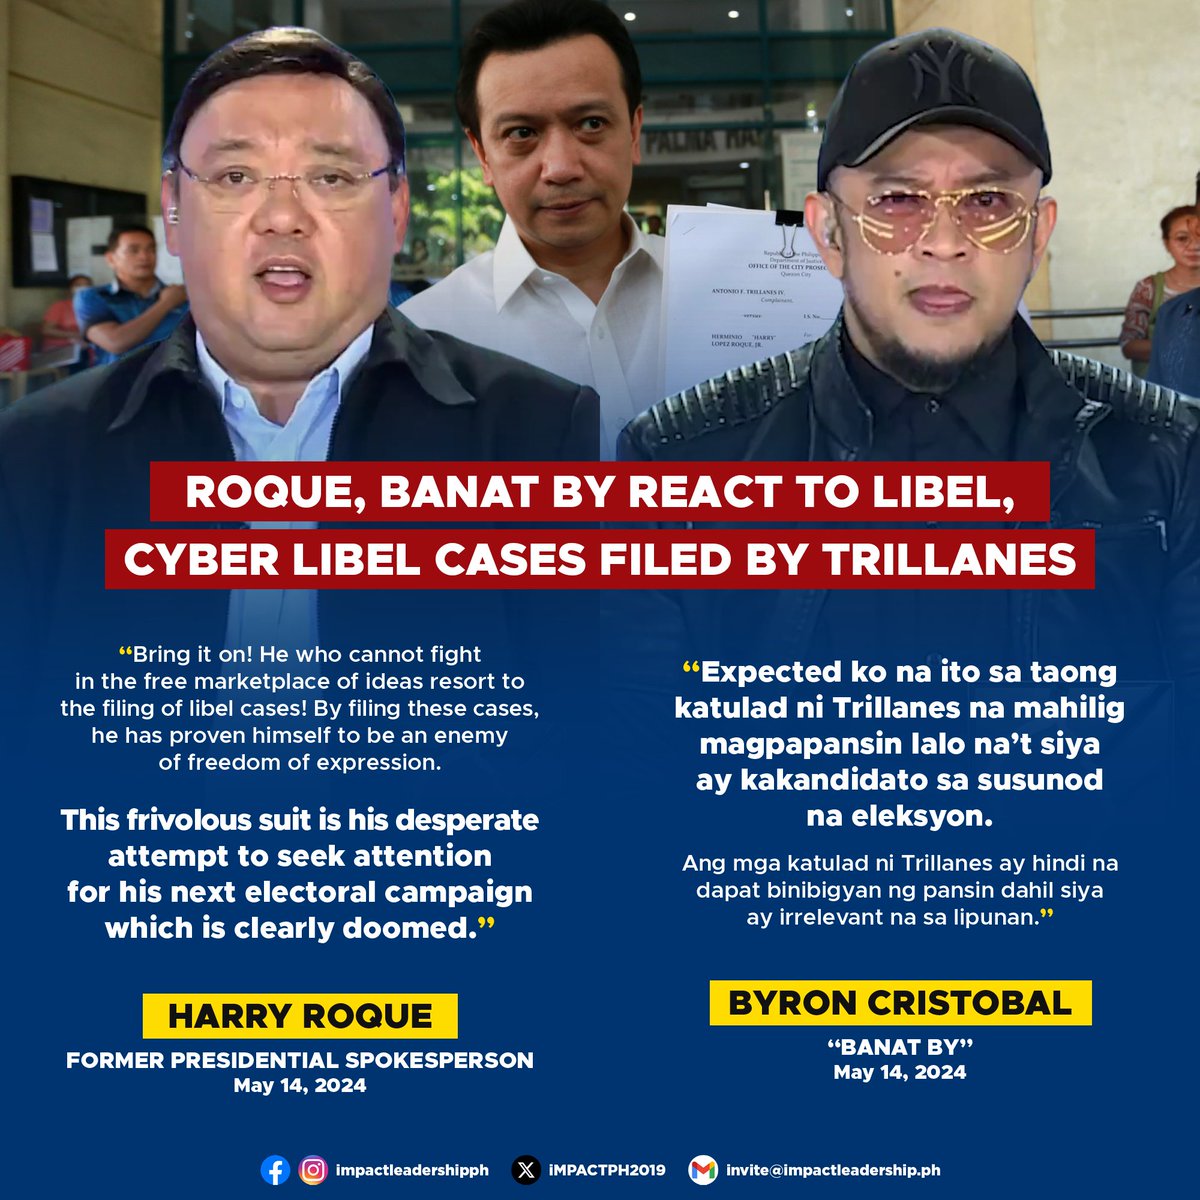 'BRING IT ON!' Former Presidential Spokesperson Harry Roque and Byron Cristobal, also known as Banat By, react to the libel and cyber libel cases filed by former Sen. Sonny Trillanes against them and other 'pro-Duterte' personalities.